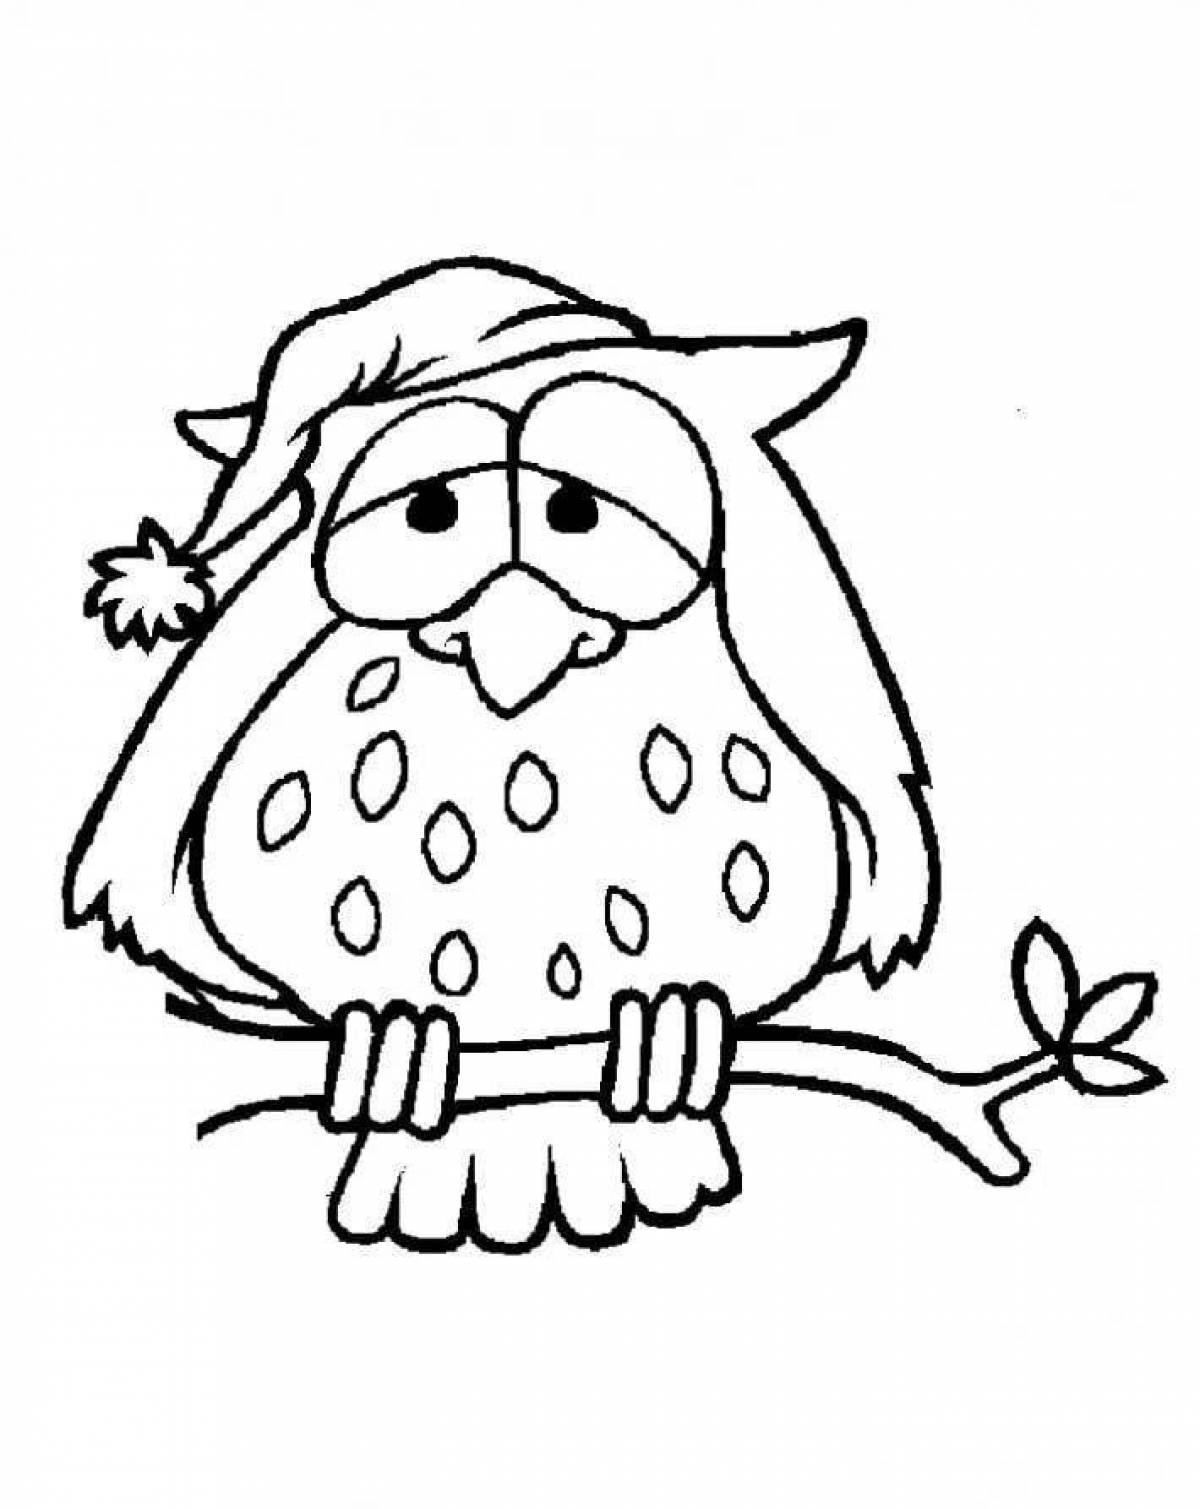 Gorgeous owl coloring book